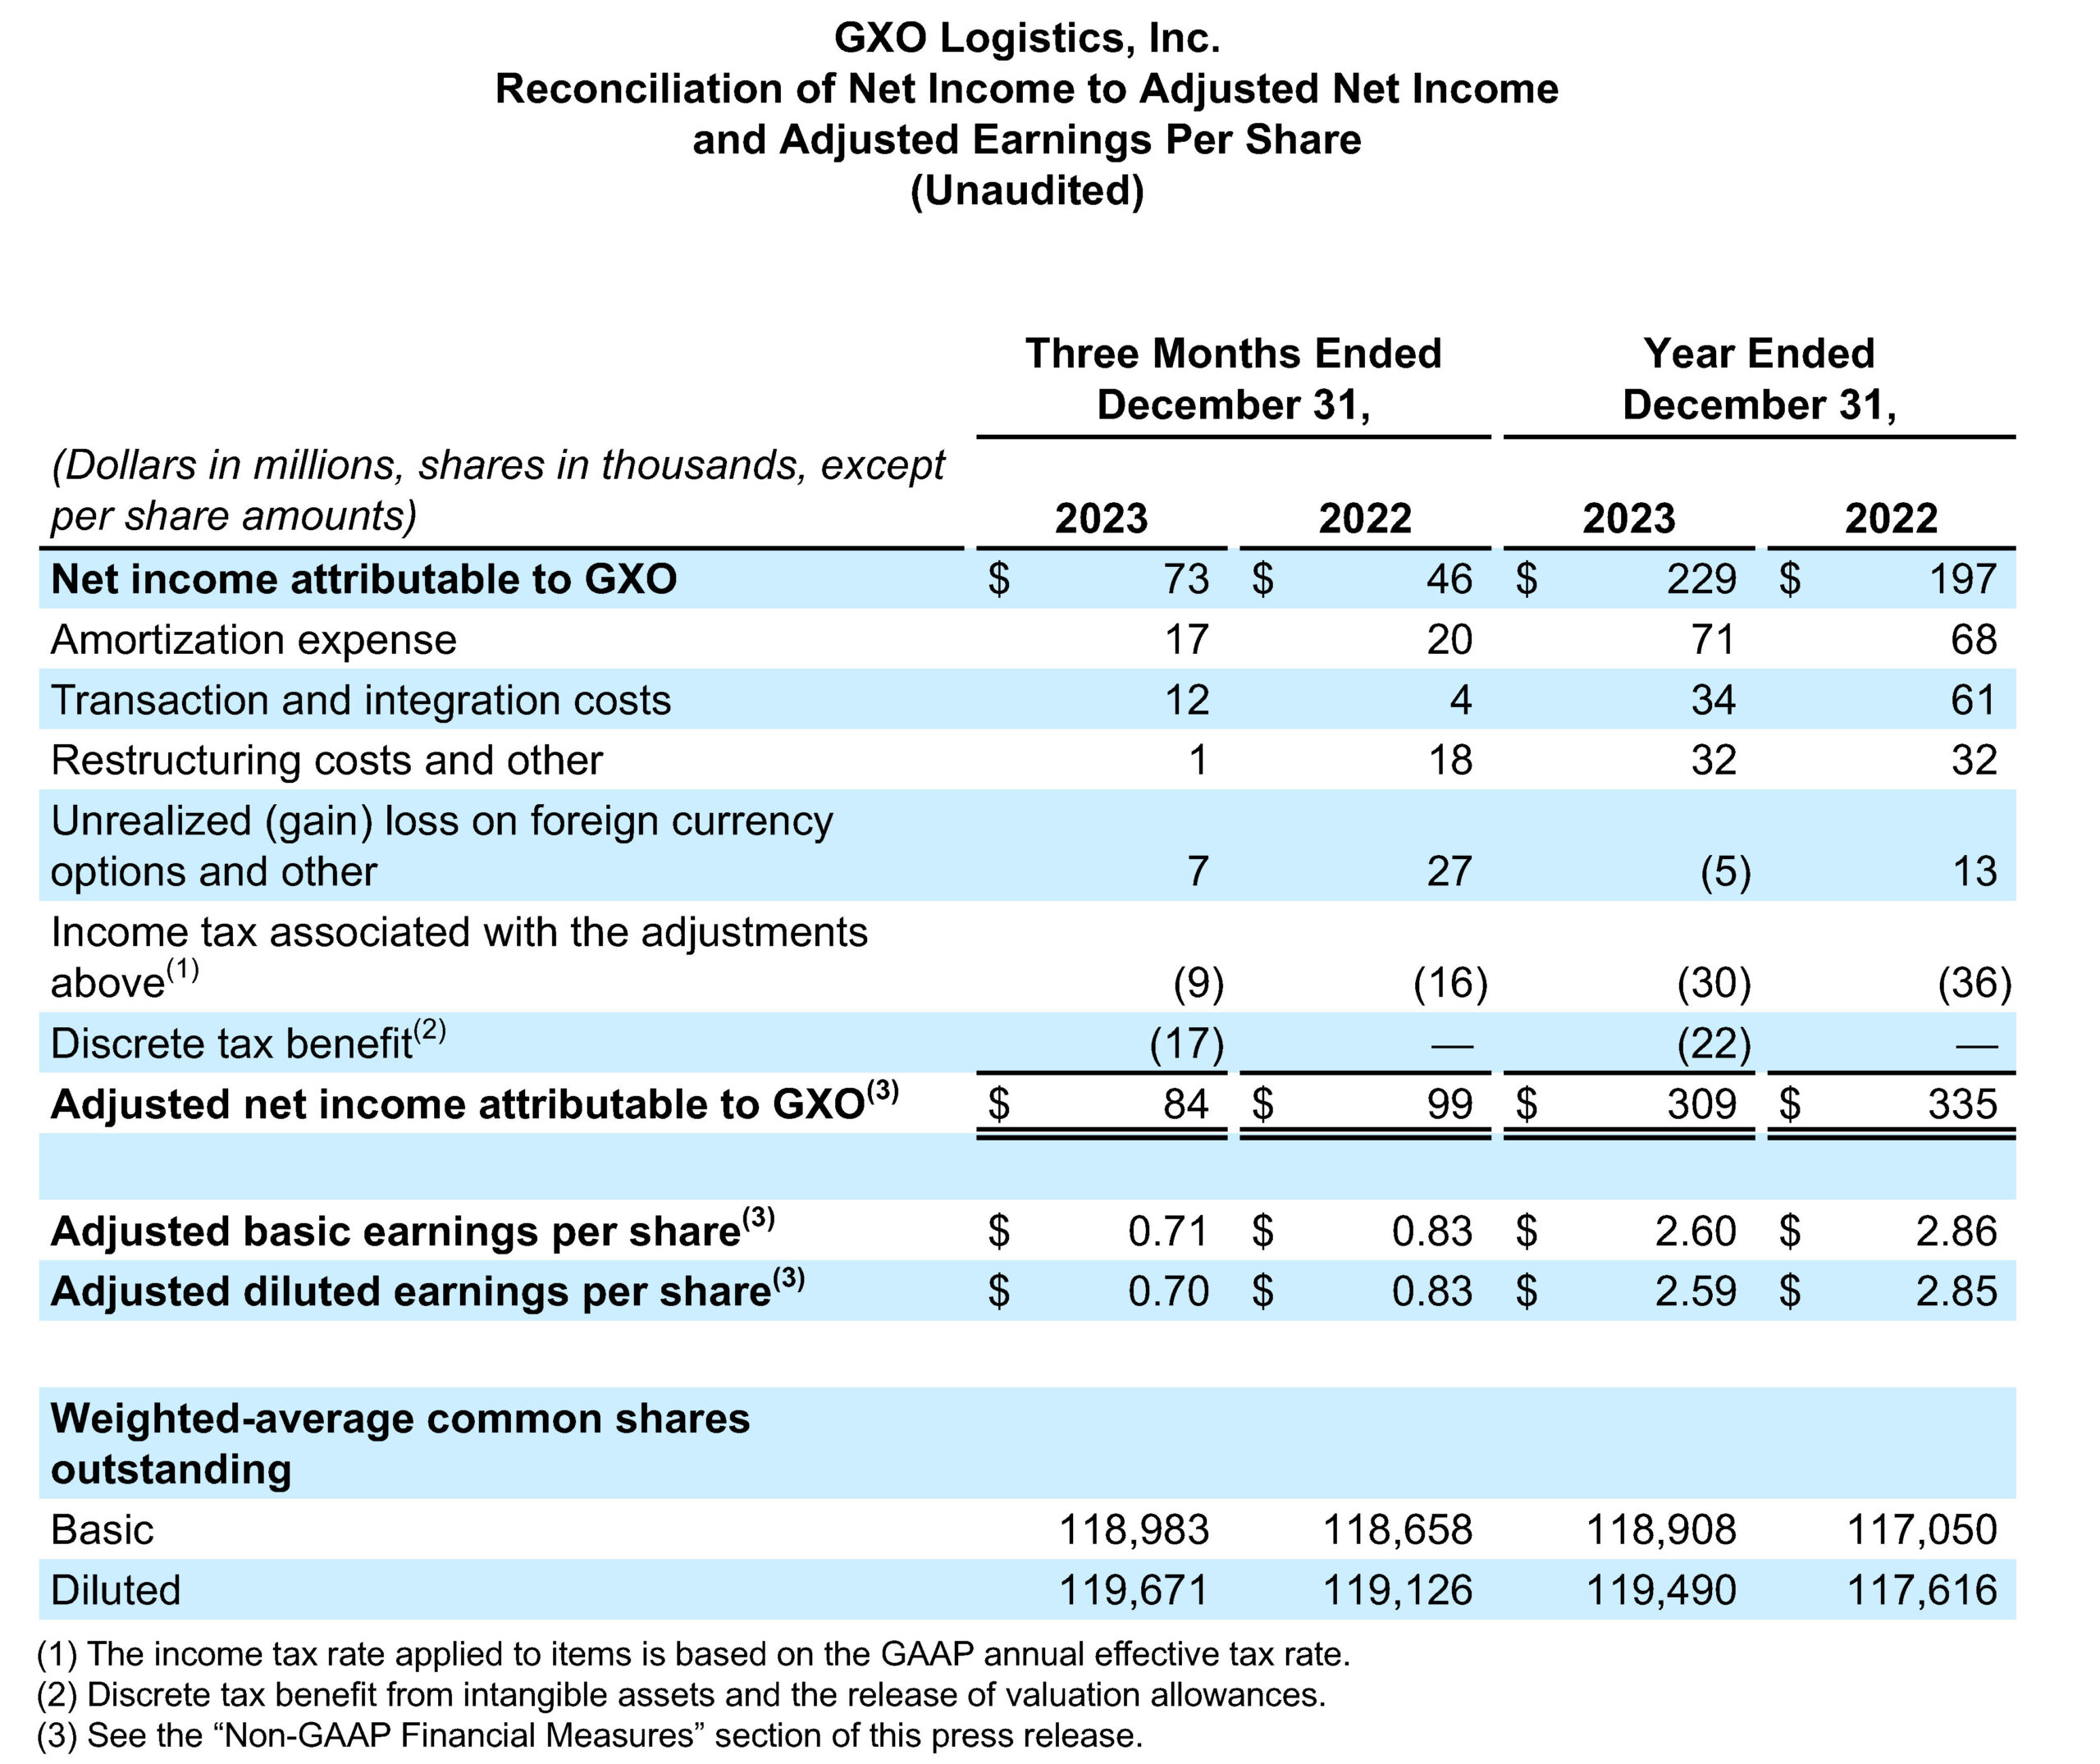 Reconciliation of Net Income to Adjusted Net Income and Adjusted Earnings Per Share